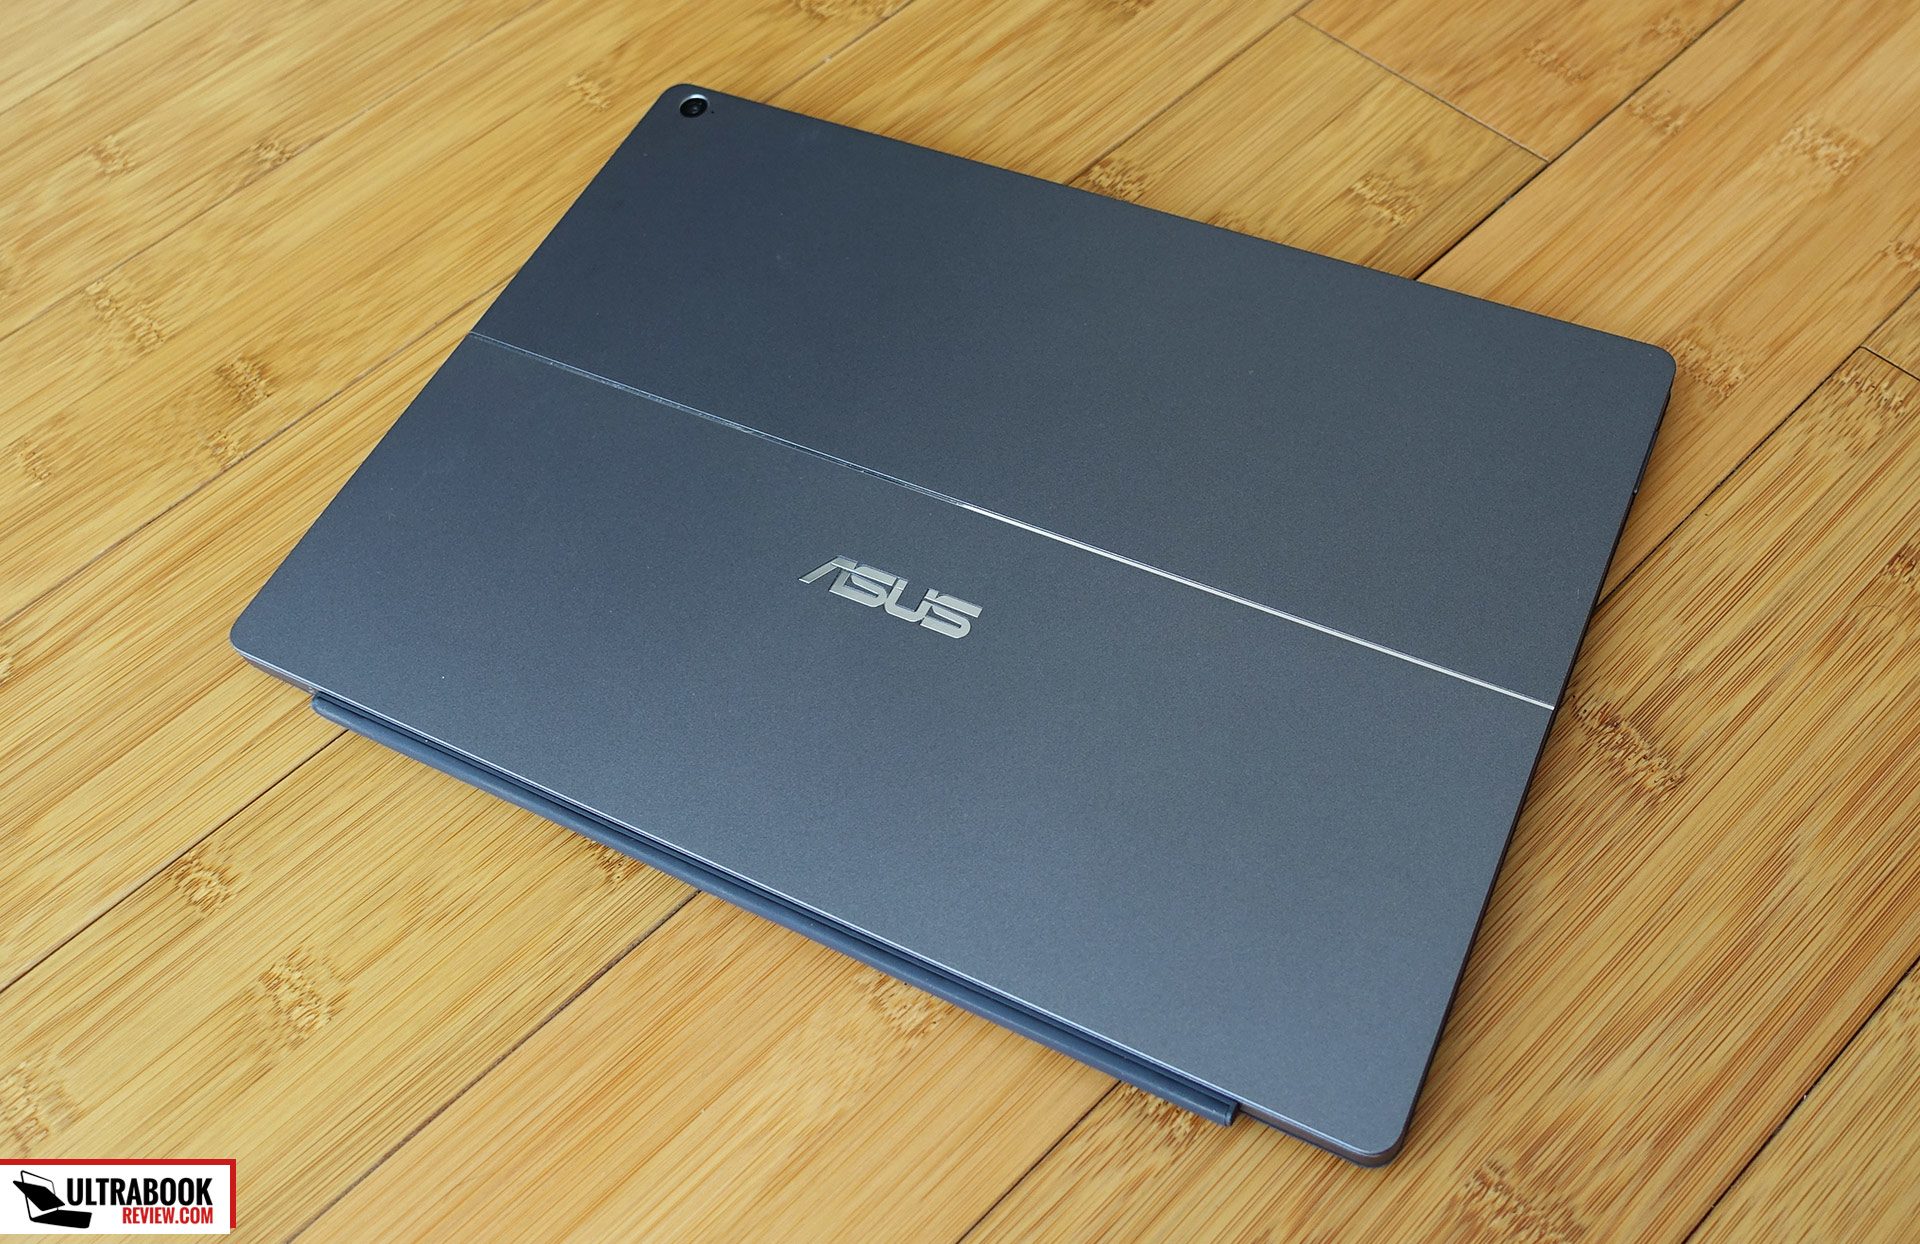 Asus Transformer 3 Pro T303UA review - beefed up Surface Pro